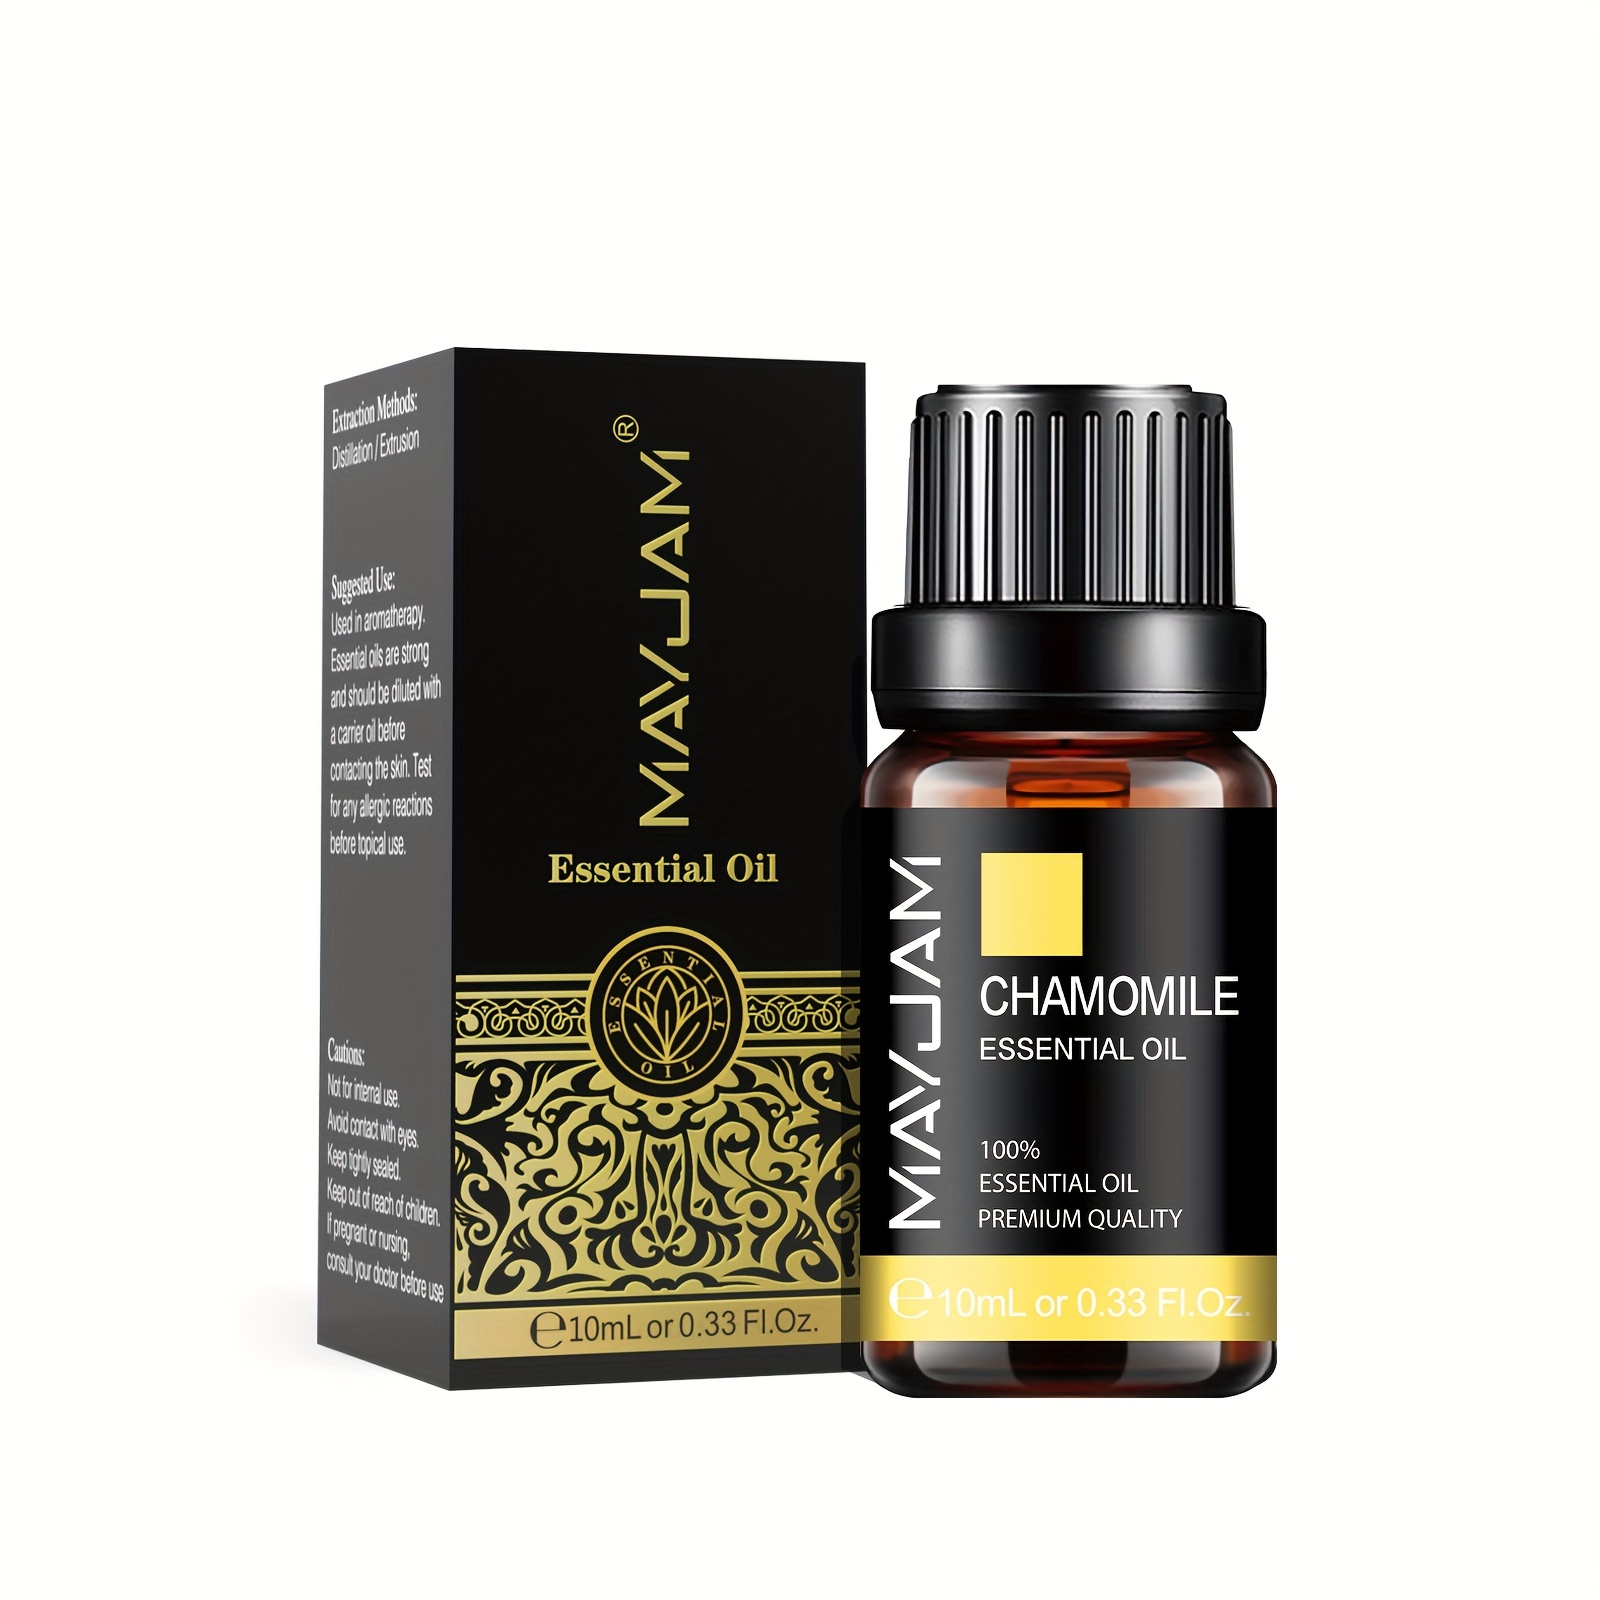 EUQEE Sandalwood Essential Oil(4 oz/118 ml) Therapeutic Grade Essential Oil-with Glass Dropper,Perfect for Diffusers